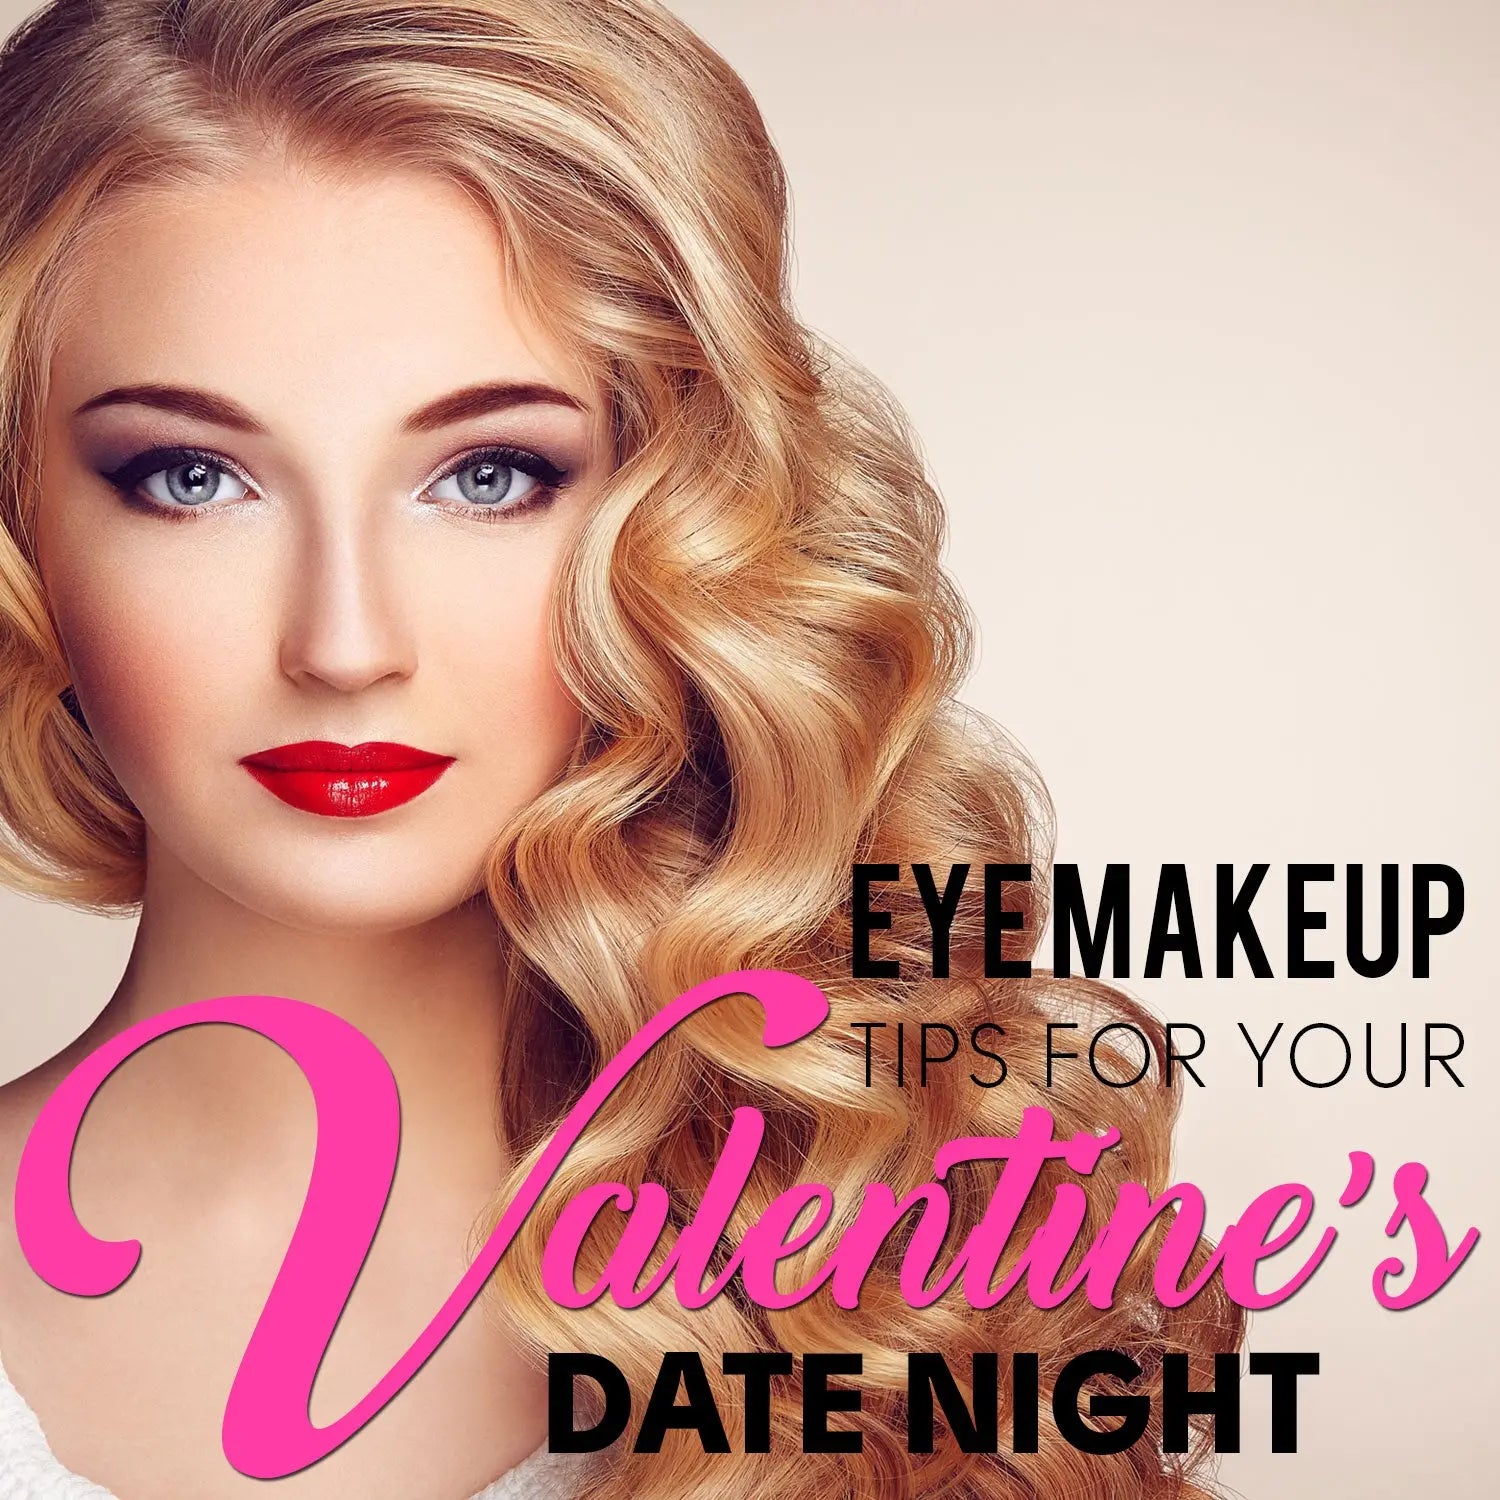 EYE MAKEUP TIPS FOR YOUR VALENTINE’S DATE NIGHT